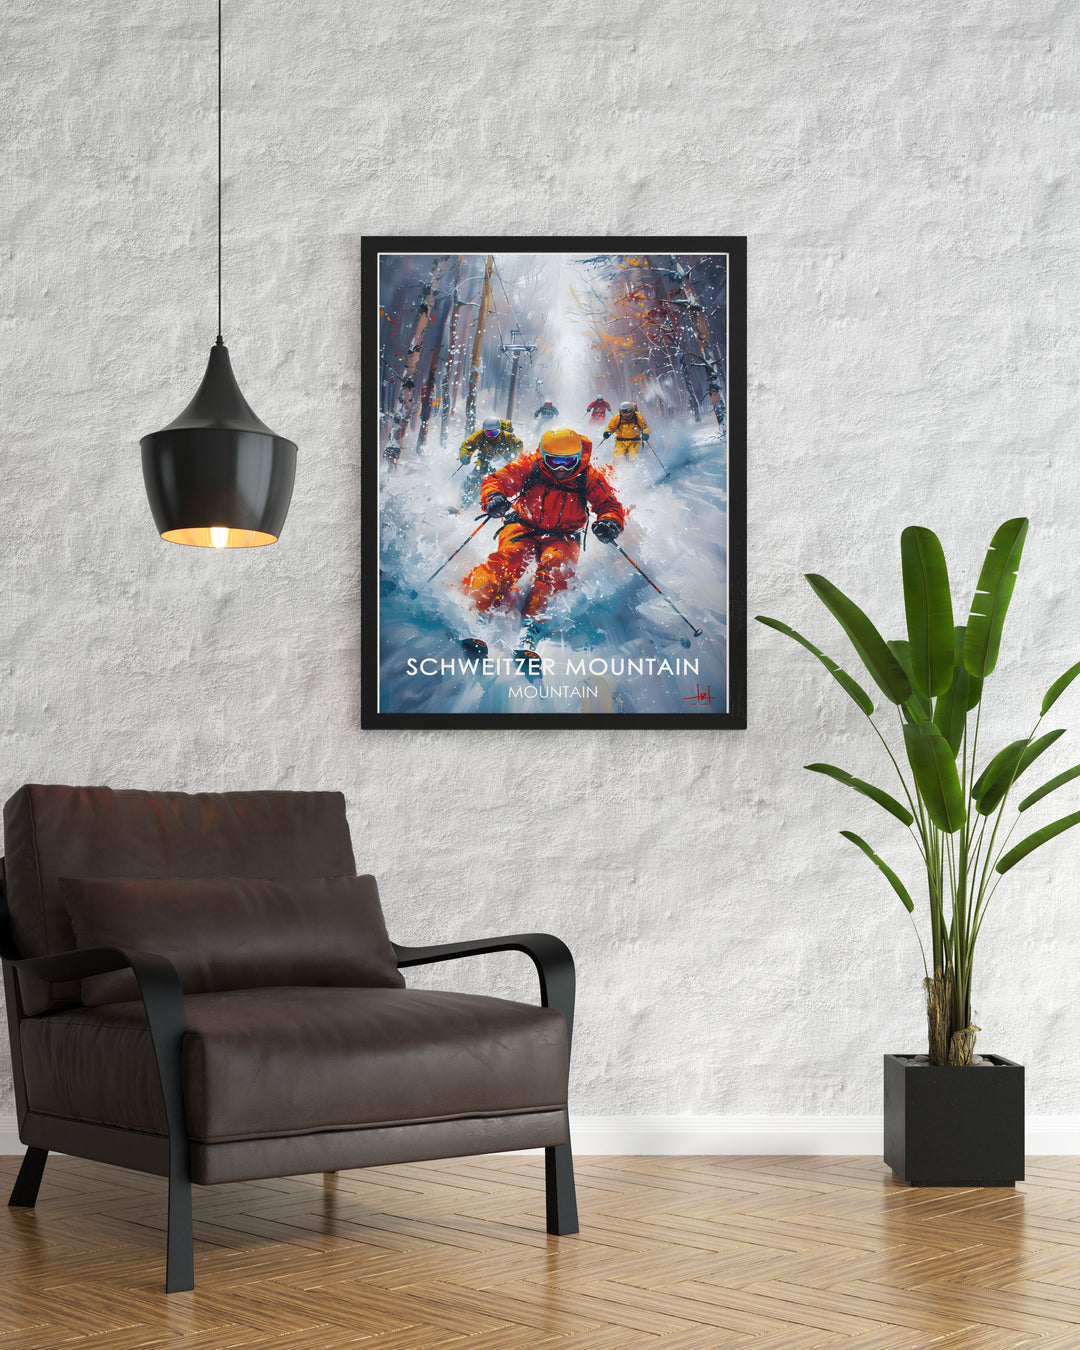 Detailed vintage poster of Schweitzer Mountain ski resort, showcasing the thrilling slopes and snow covered landscape, perfect for winter sports enthusiasts and vintage decor.